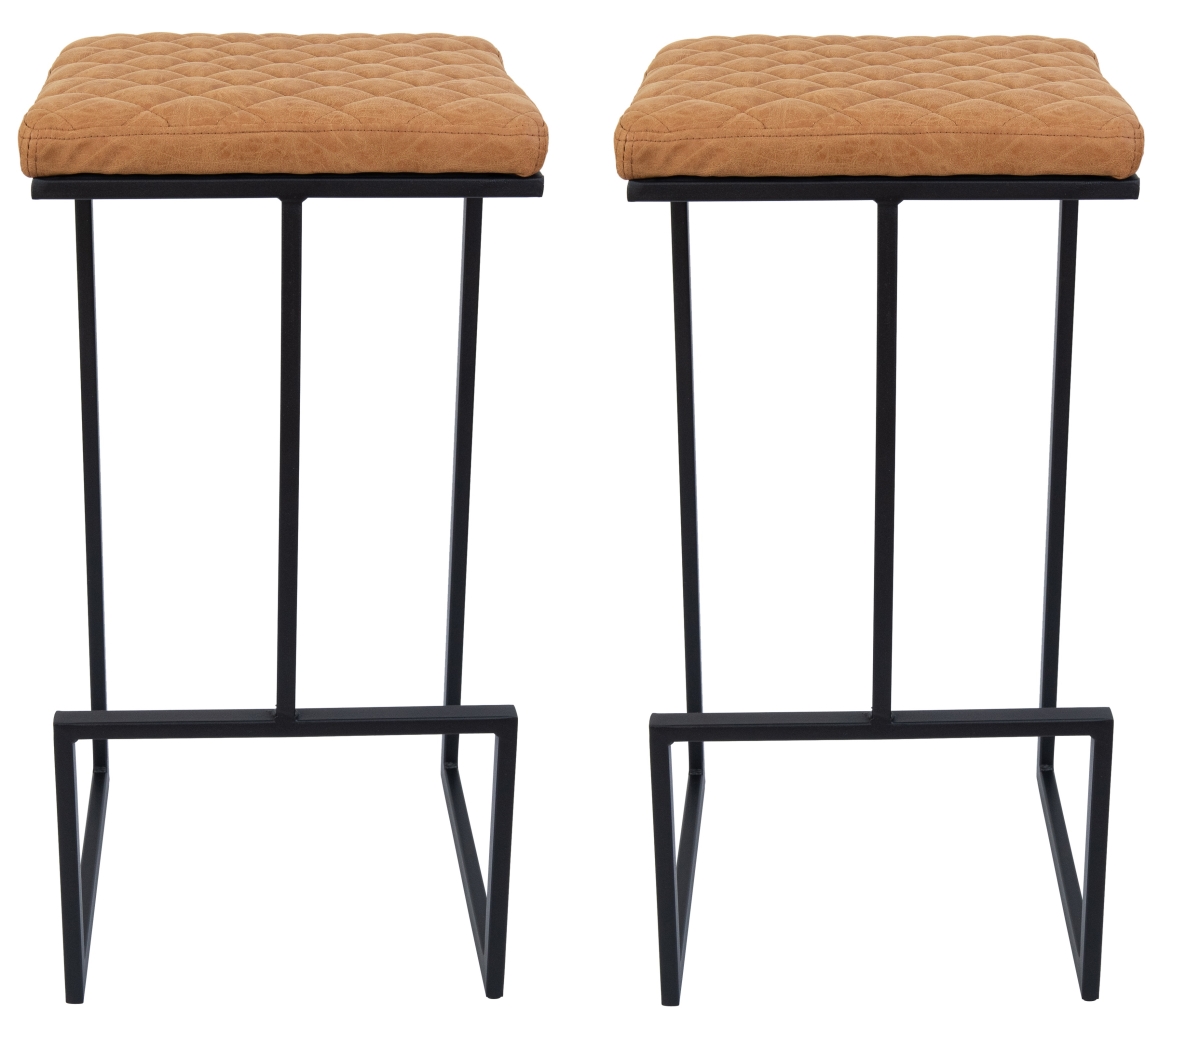 Picture of LeisureMod QS29BR2 29 x 15 x 15 in. Quincy Leather Bar Stools with Metal Frame- Light Brown - Set of 2